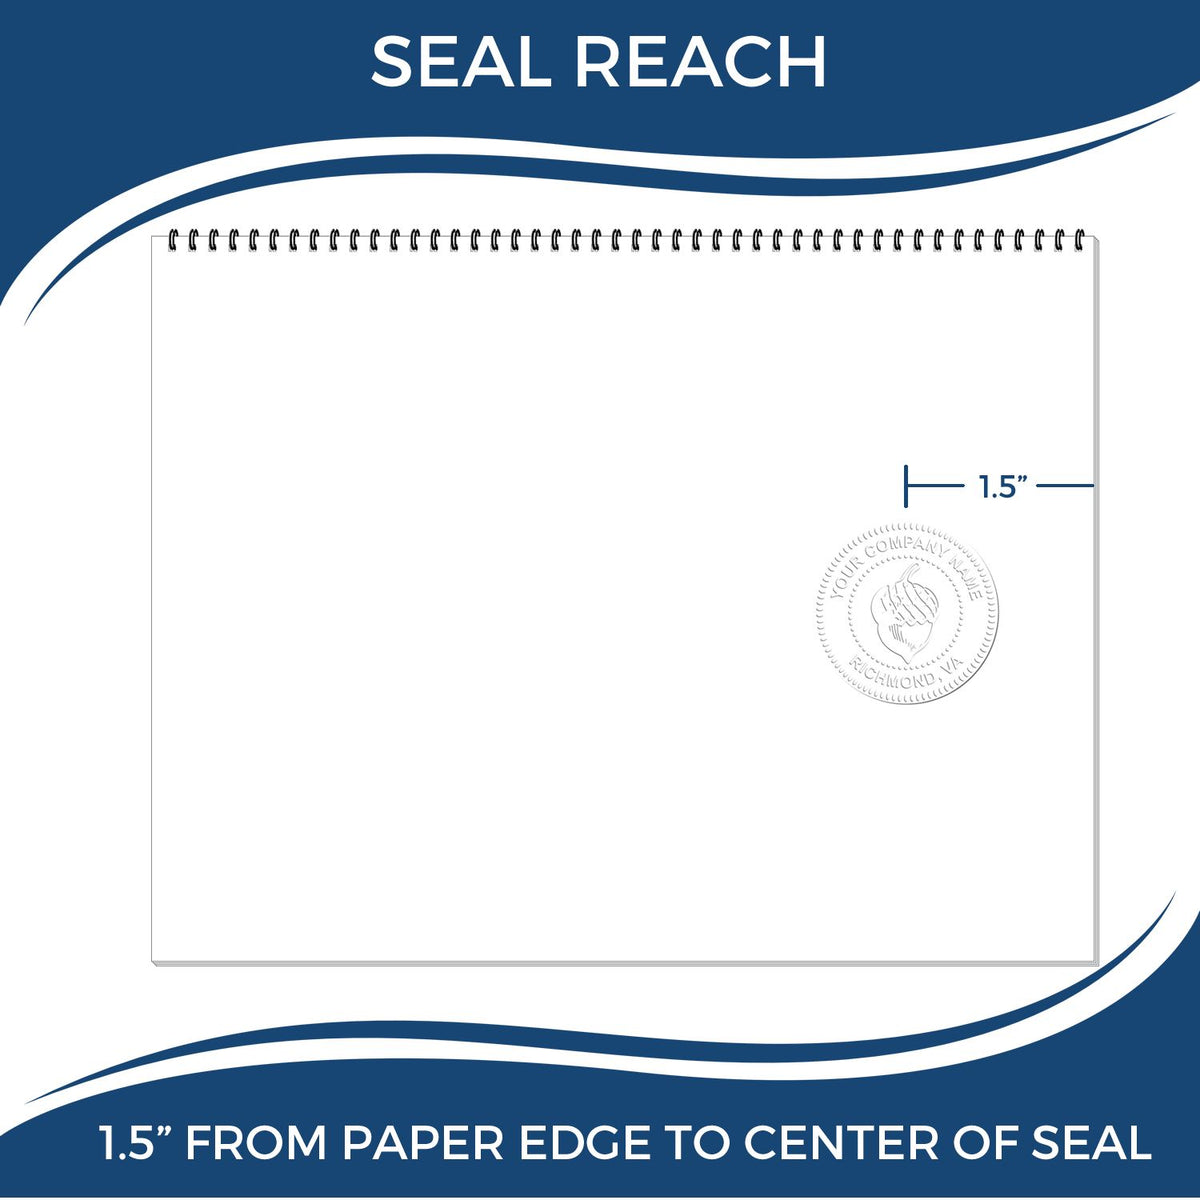 An infographic showing the seal reach which is represented by a ruler and a miniature seal image of the Gift Georgia Geologist Seal